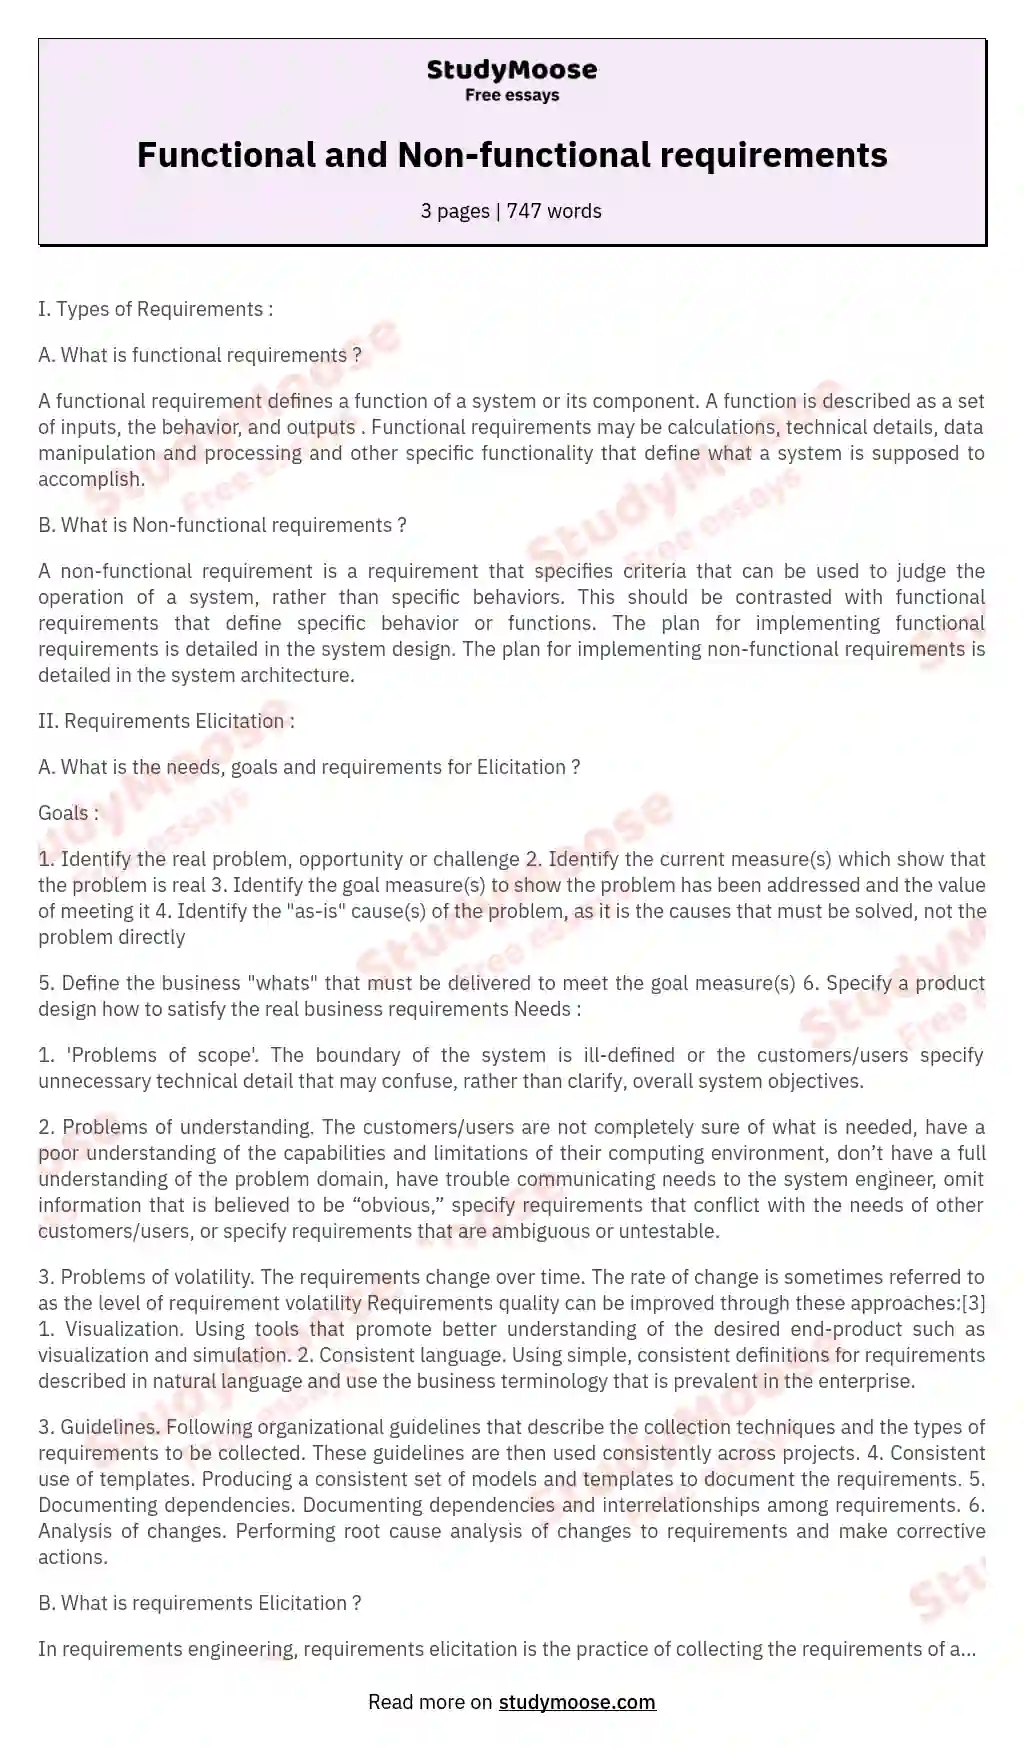 Functional and Non-functional requirements essay